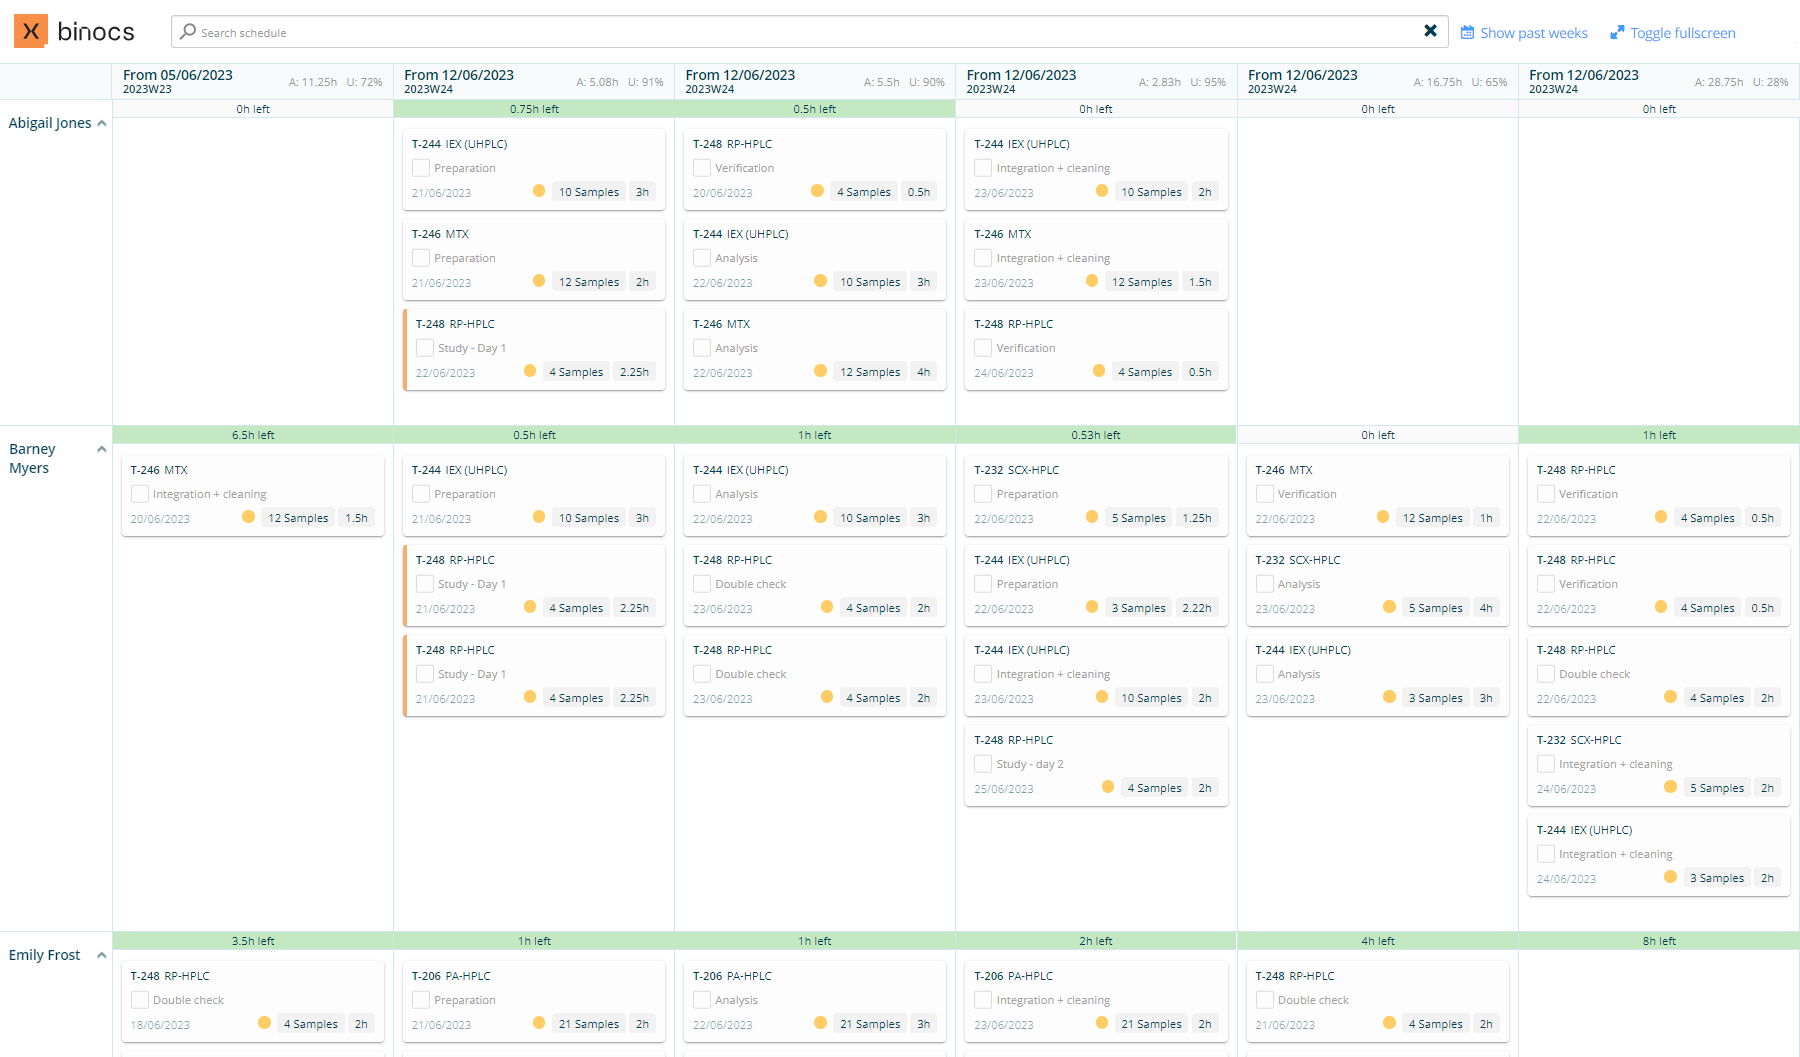 Screenshot showing the Binocs Kanban view, providing users with an overview of planned weekly tasks